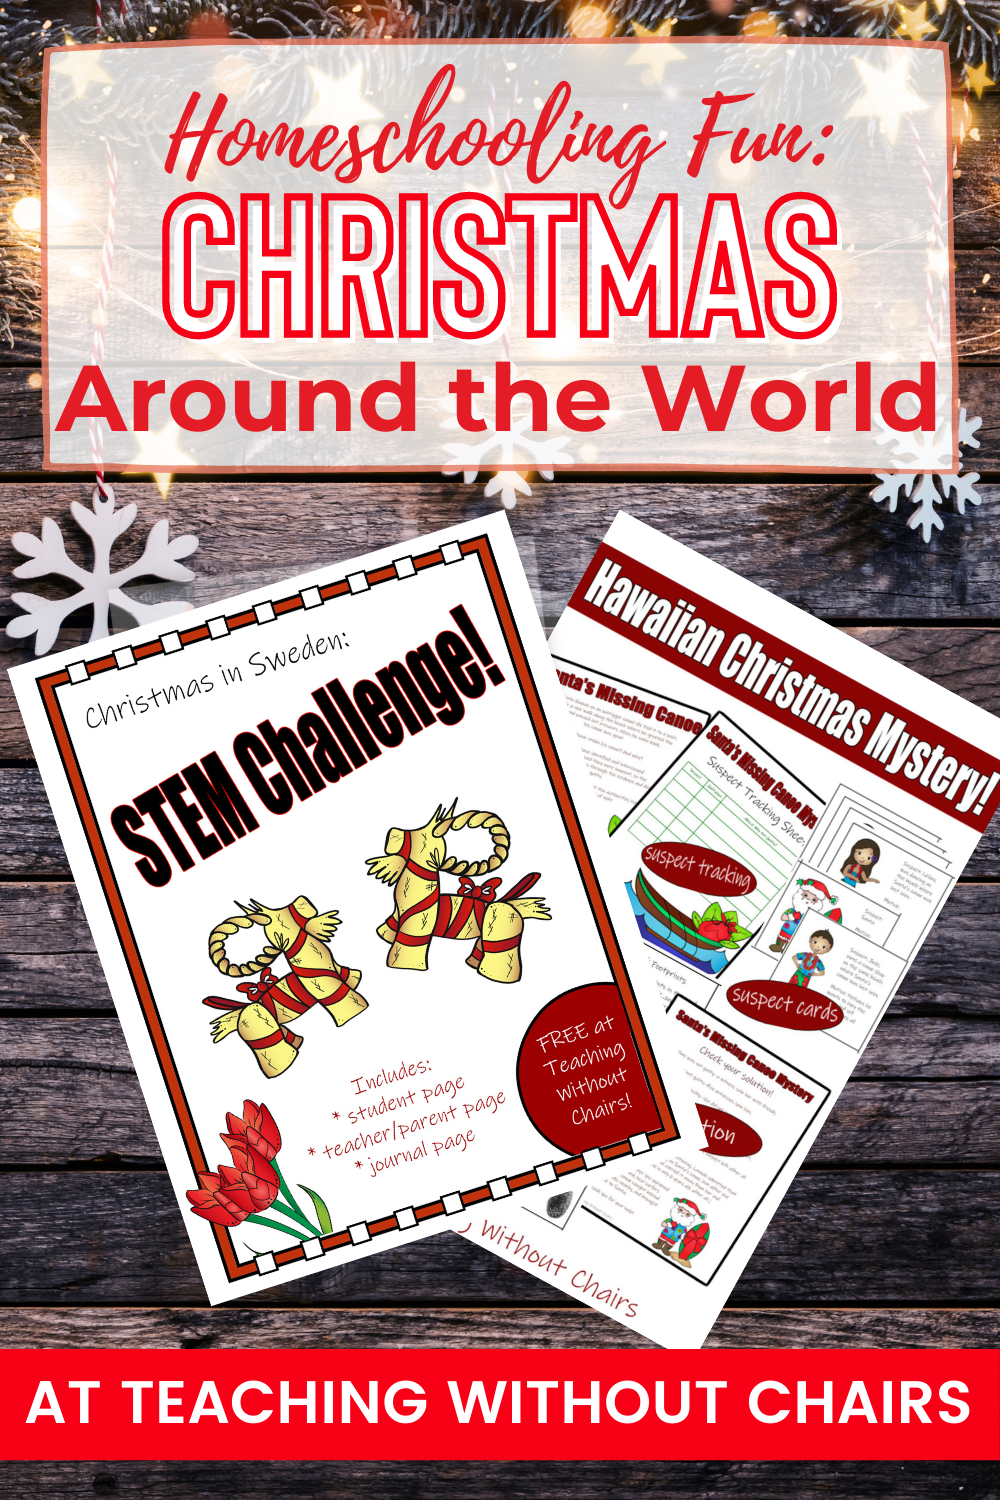 christmas-around-the-world-for-kids-activities-homeschooling-fun-through-the-holidays